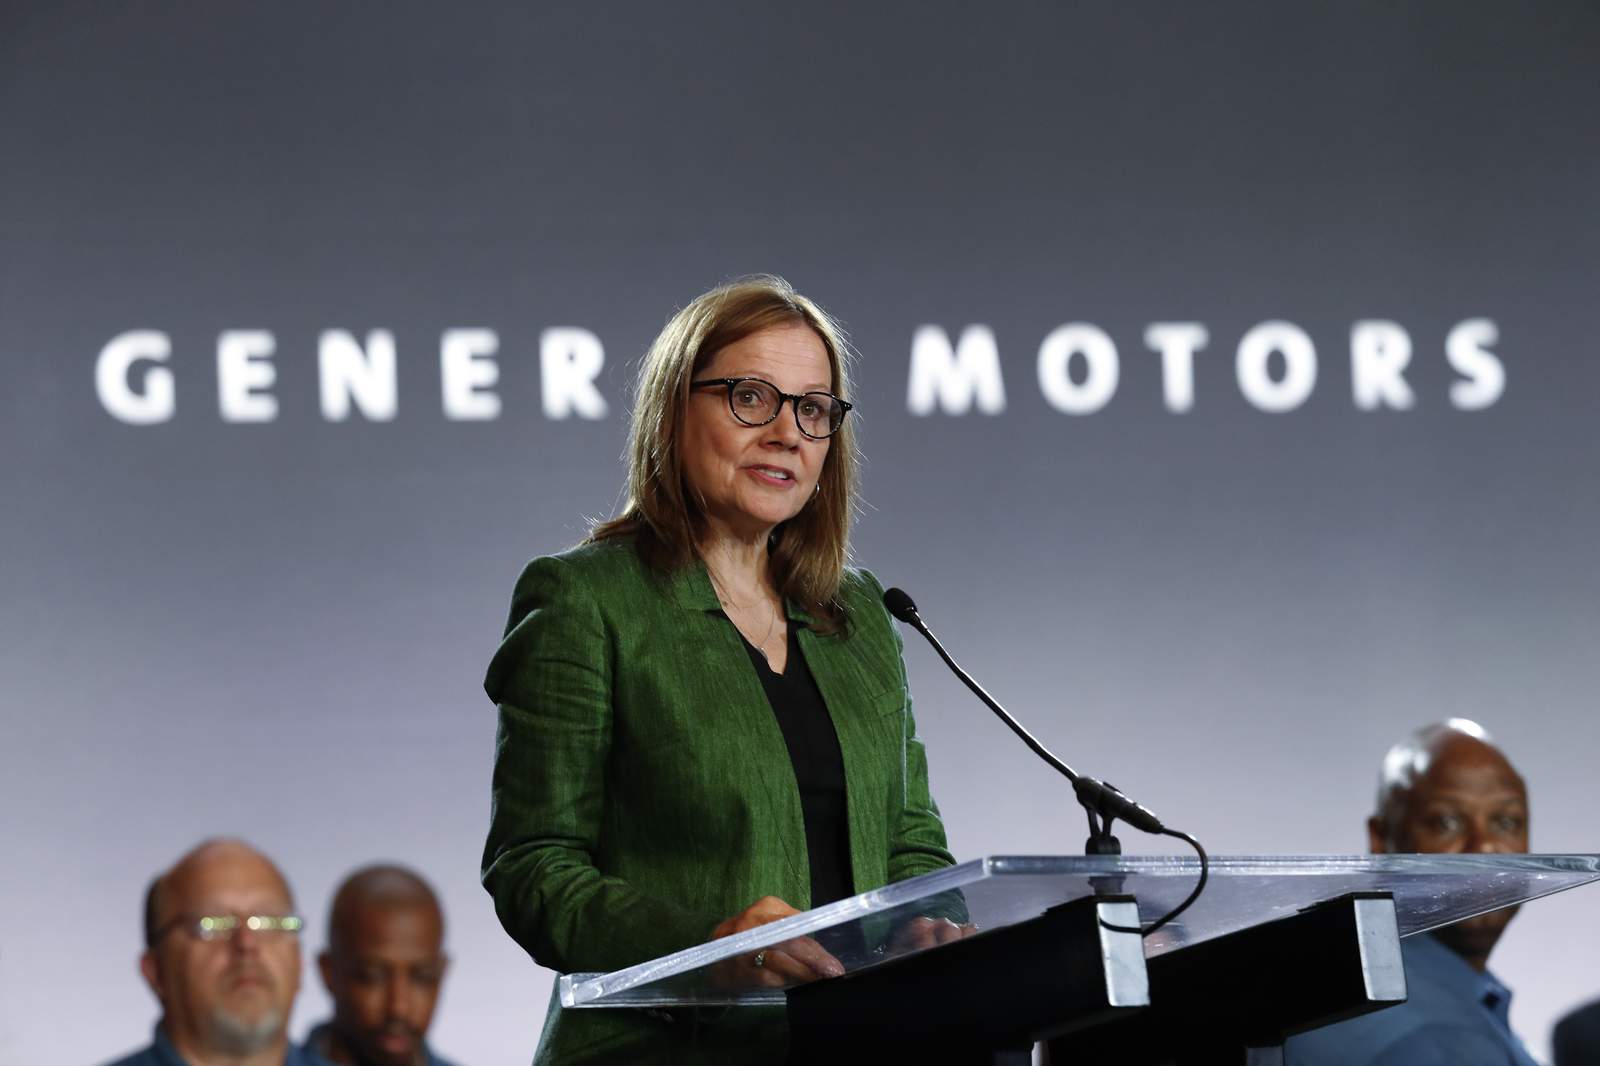 Leaders of GM, Ford among objectors to voting restrictions